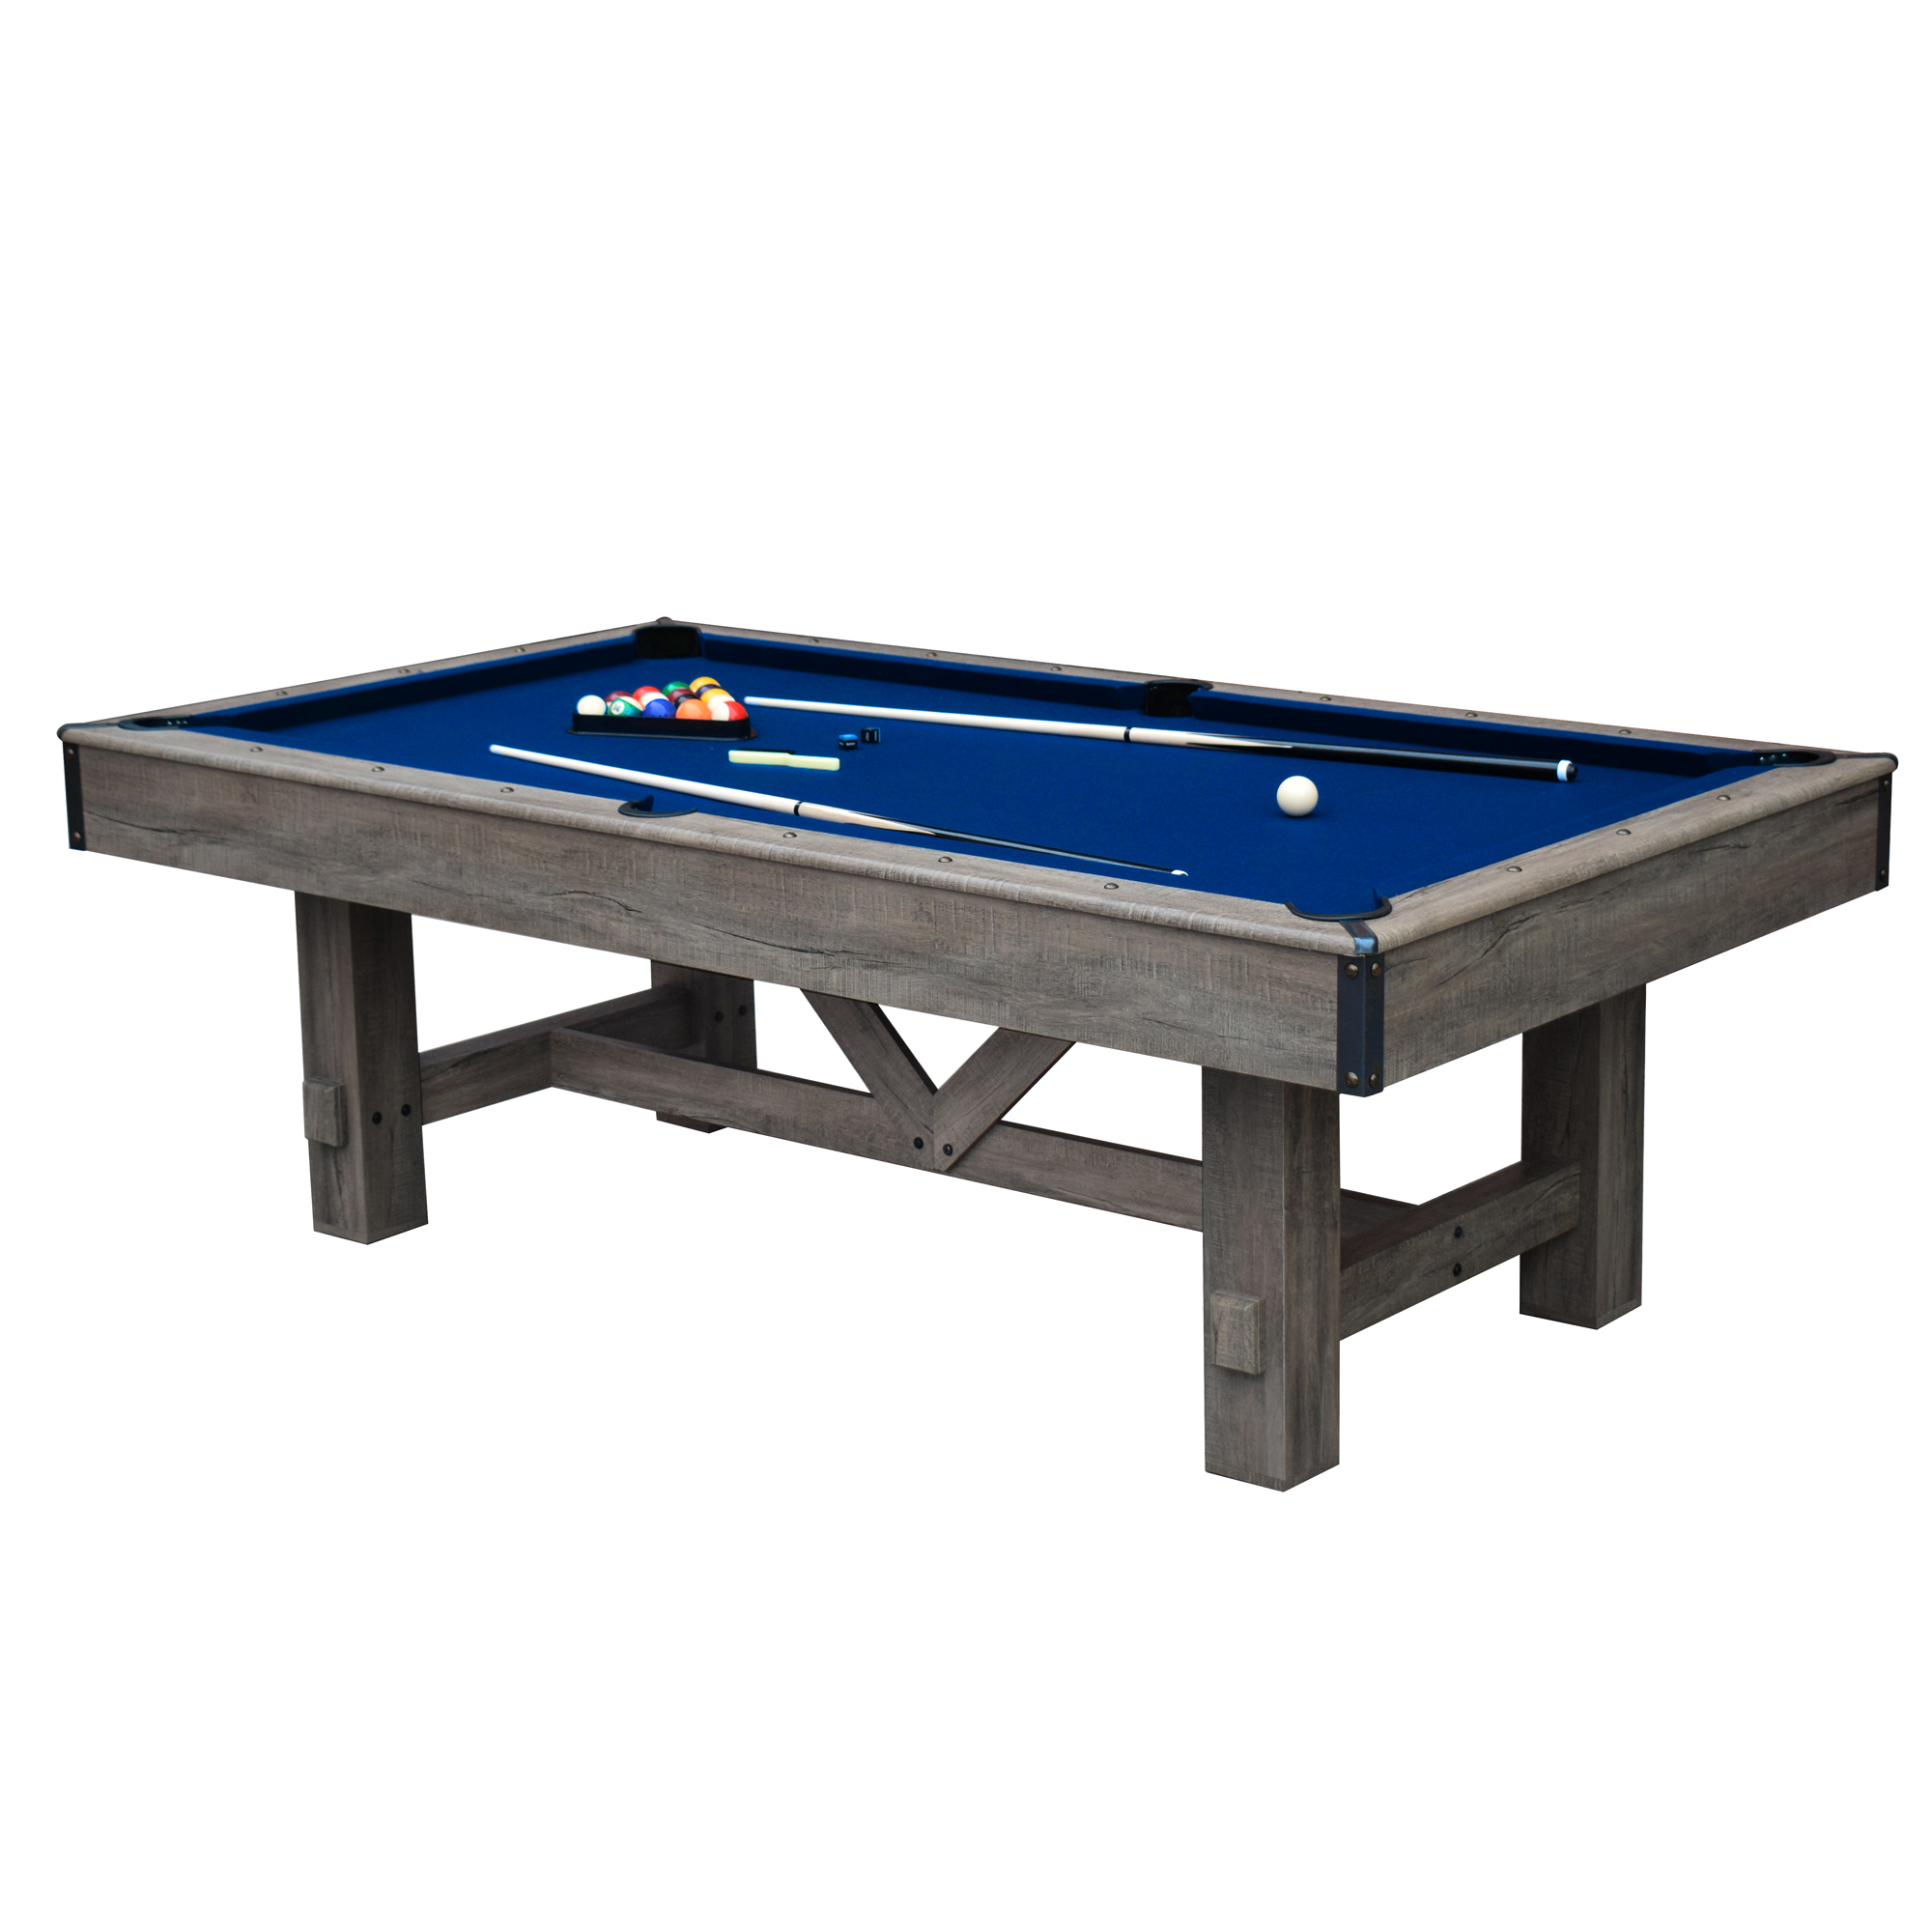 Picture of Hathaway BG3147 8 ft. Alpine Outdoor Pool Table with Aluminum Rails & Waterproof Felt, White